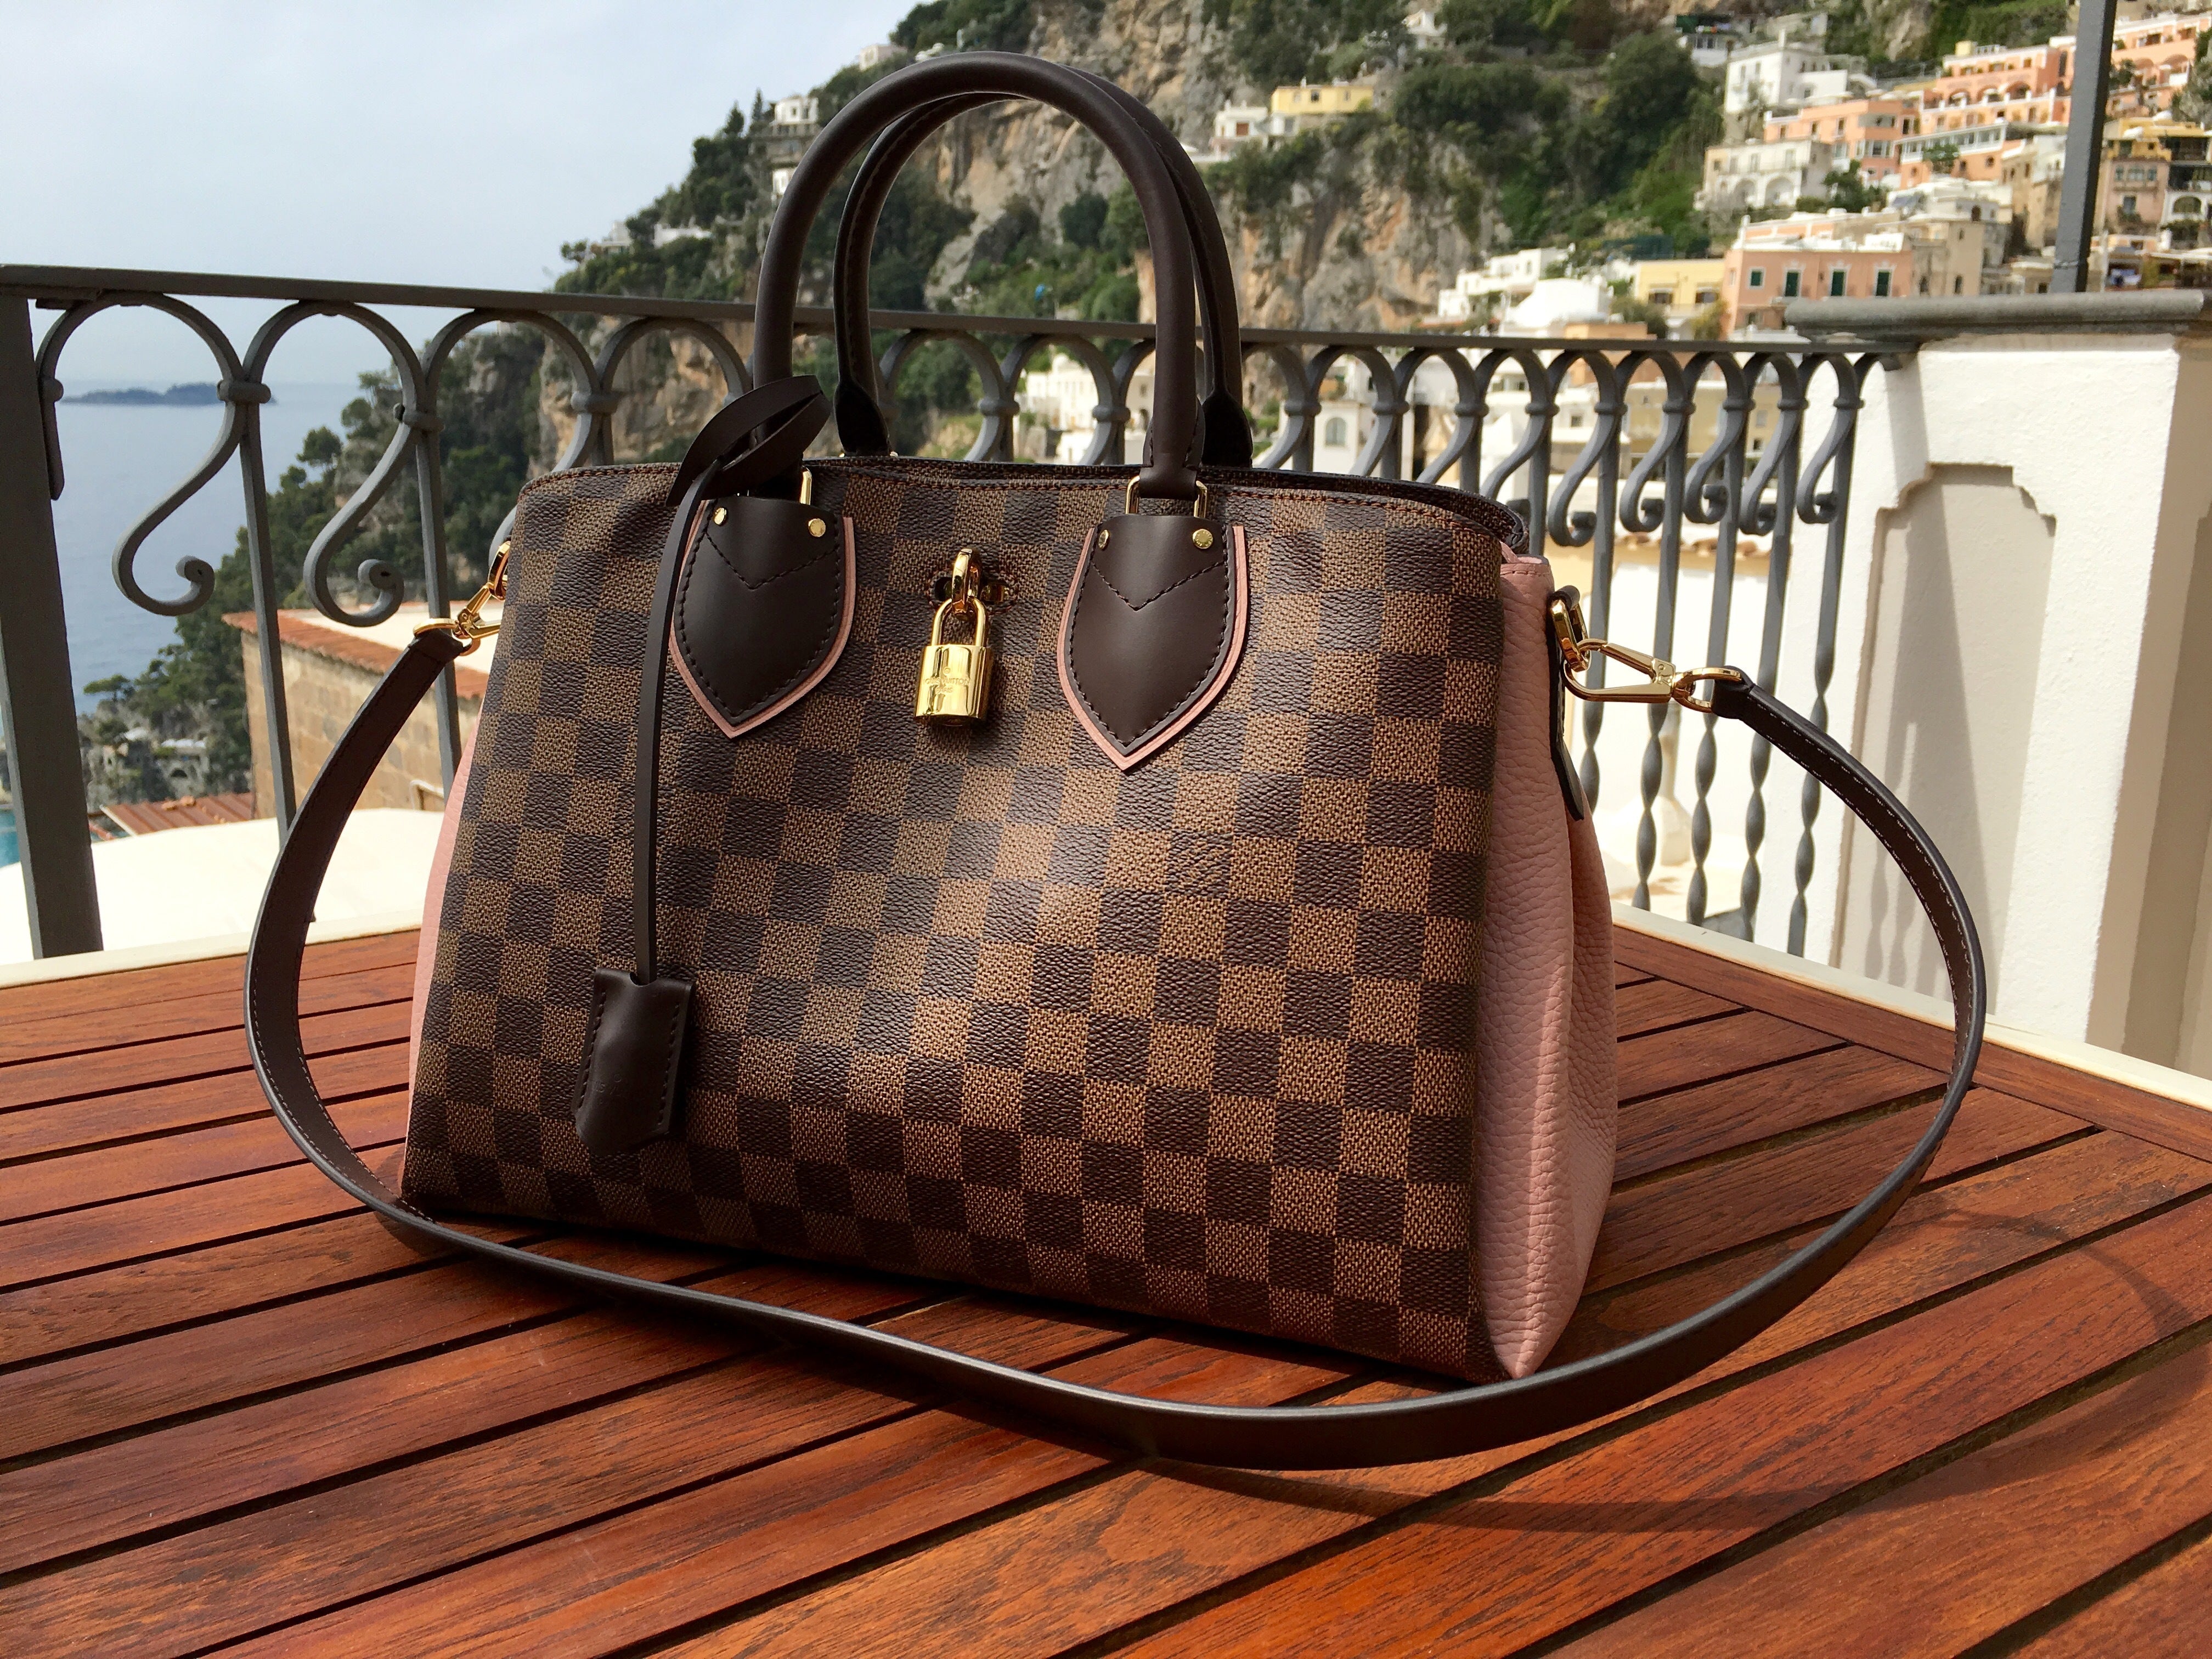 The Plush Posh | Buy & Sell | Upto 80% off Designer Brands Shop Online Authentic New & Preloved Designer Bags, Shoes & Accessories for Men & Women. Louis Vuitton, Chanel, Hermes, Gucci